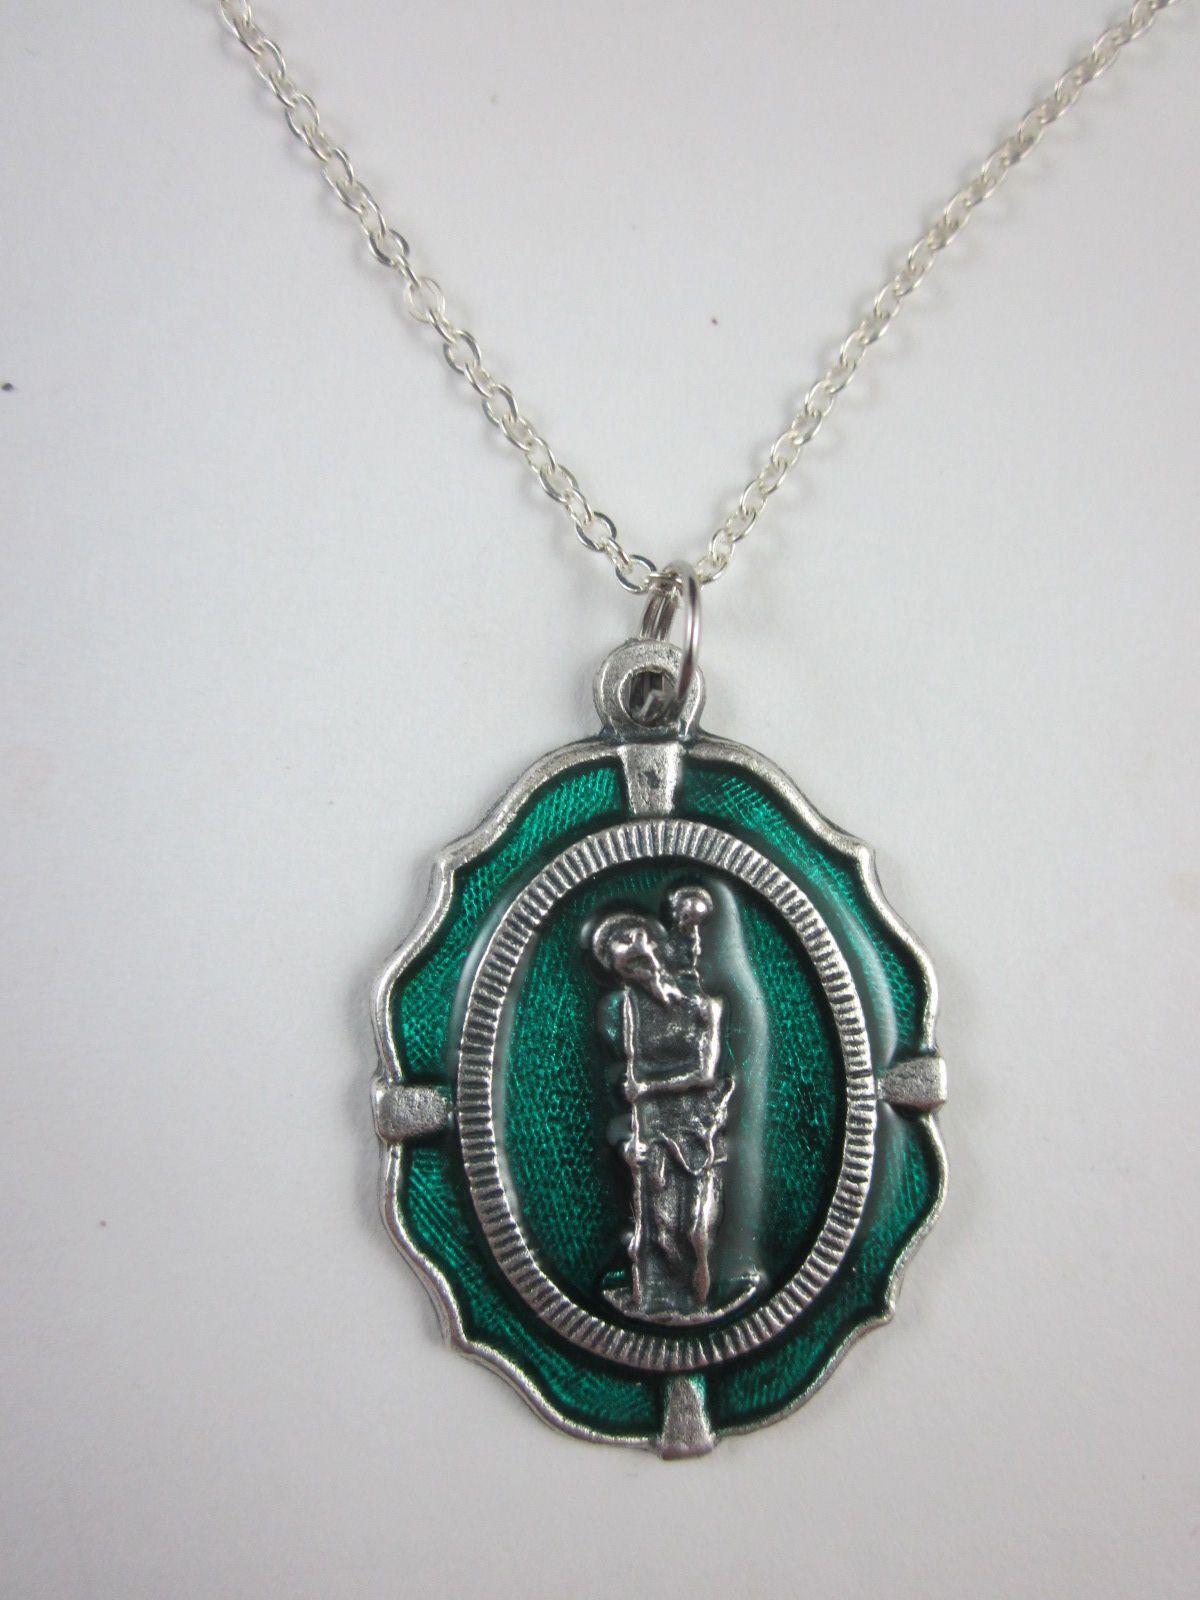 Ladies Large St Christopher Medal Green Enamel Italy Pendant Necklace 20\